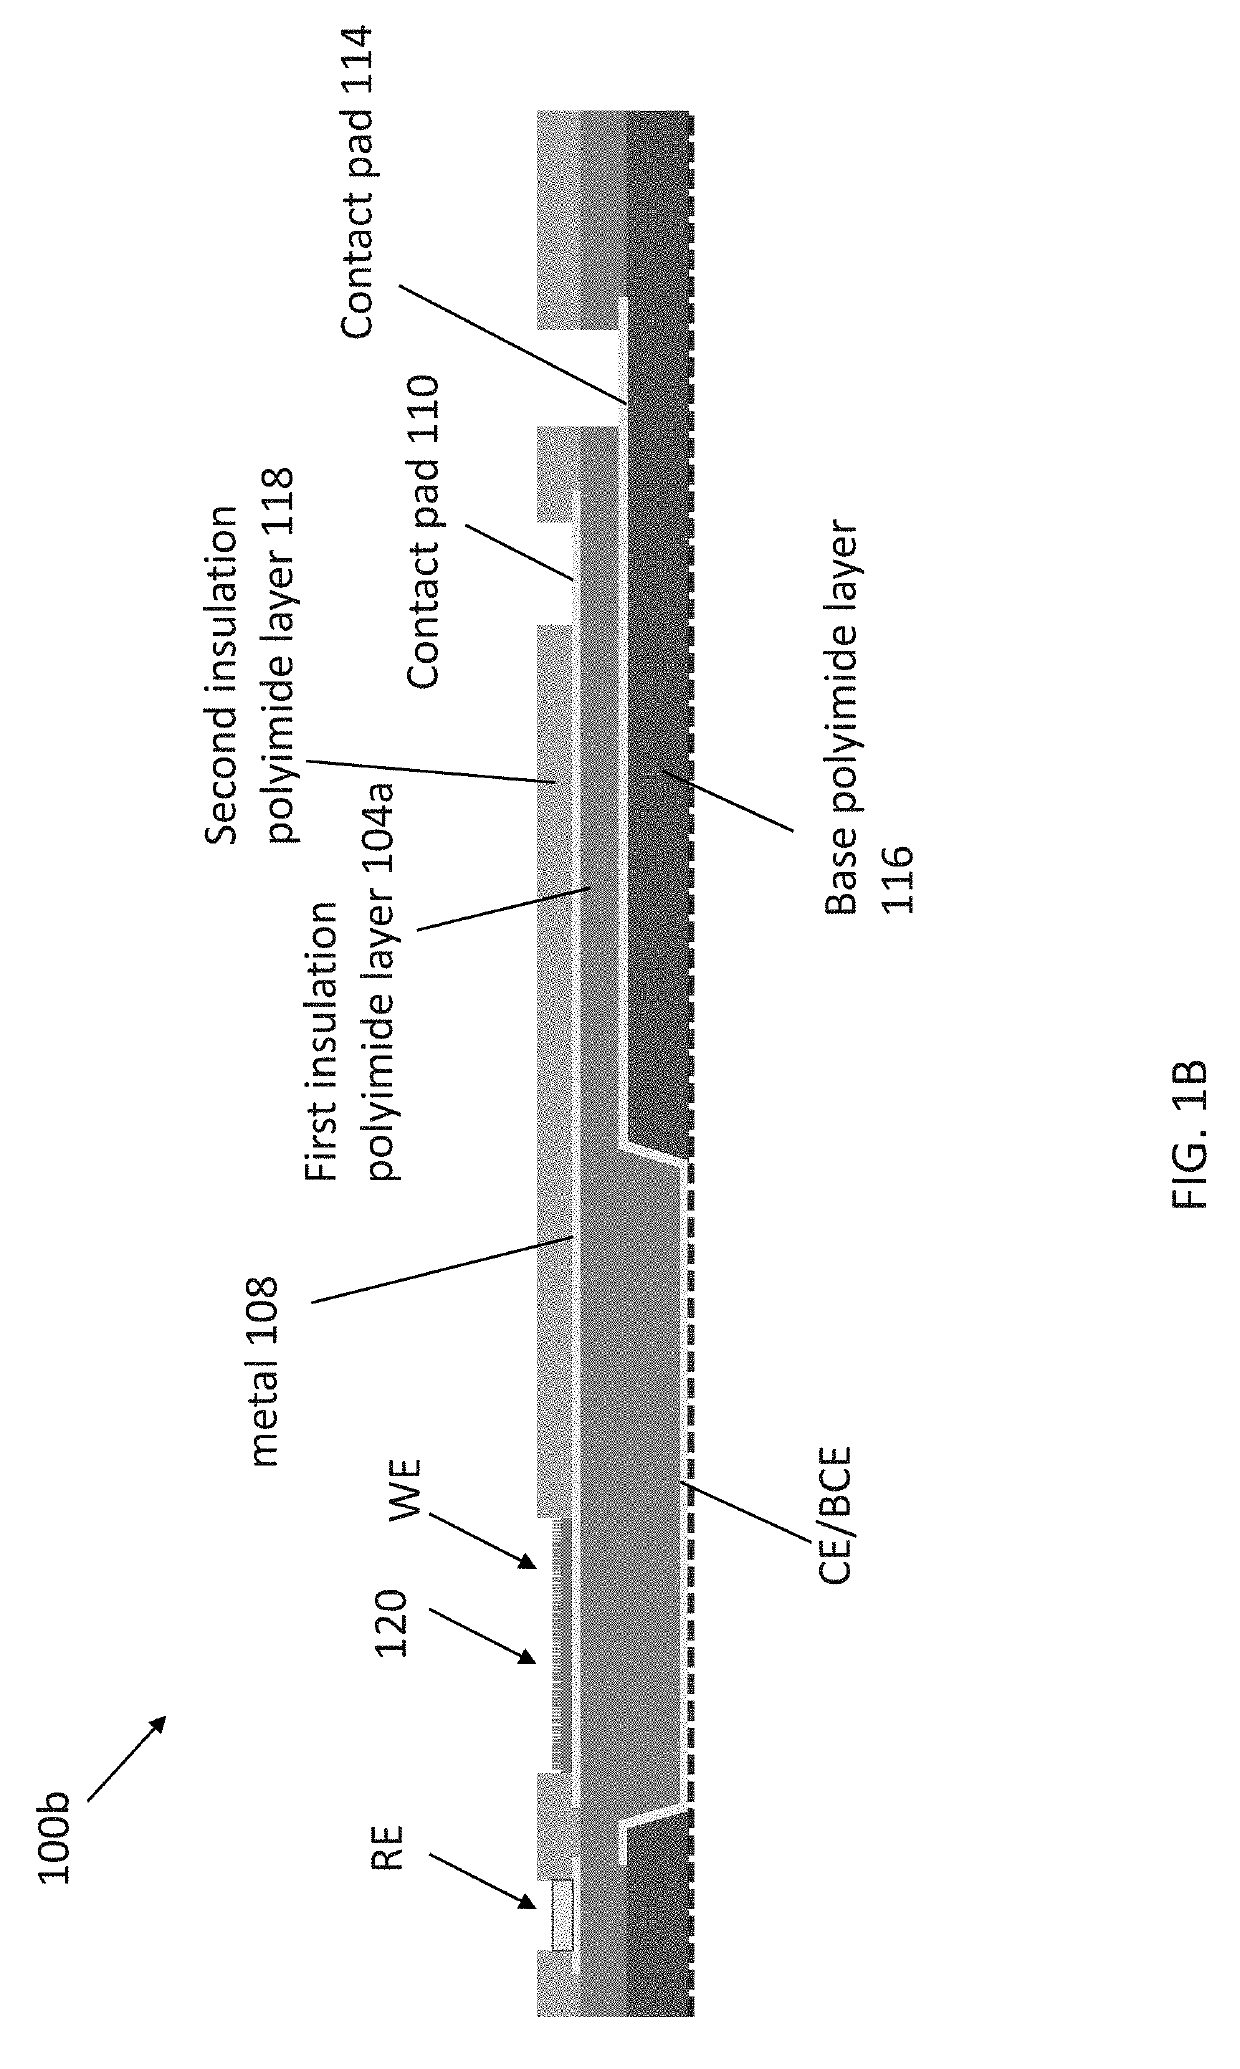 Methods for controlling physical vapor deposition metal film adhesion to substrates and surfaces